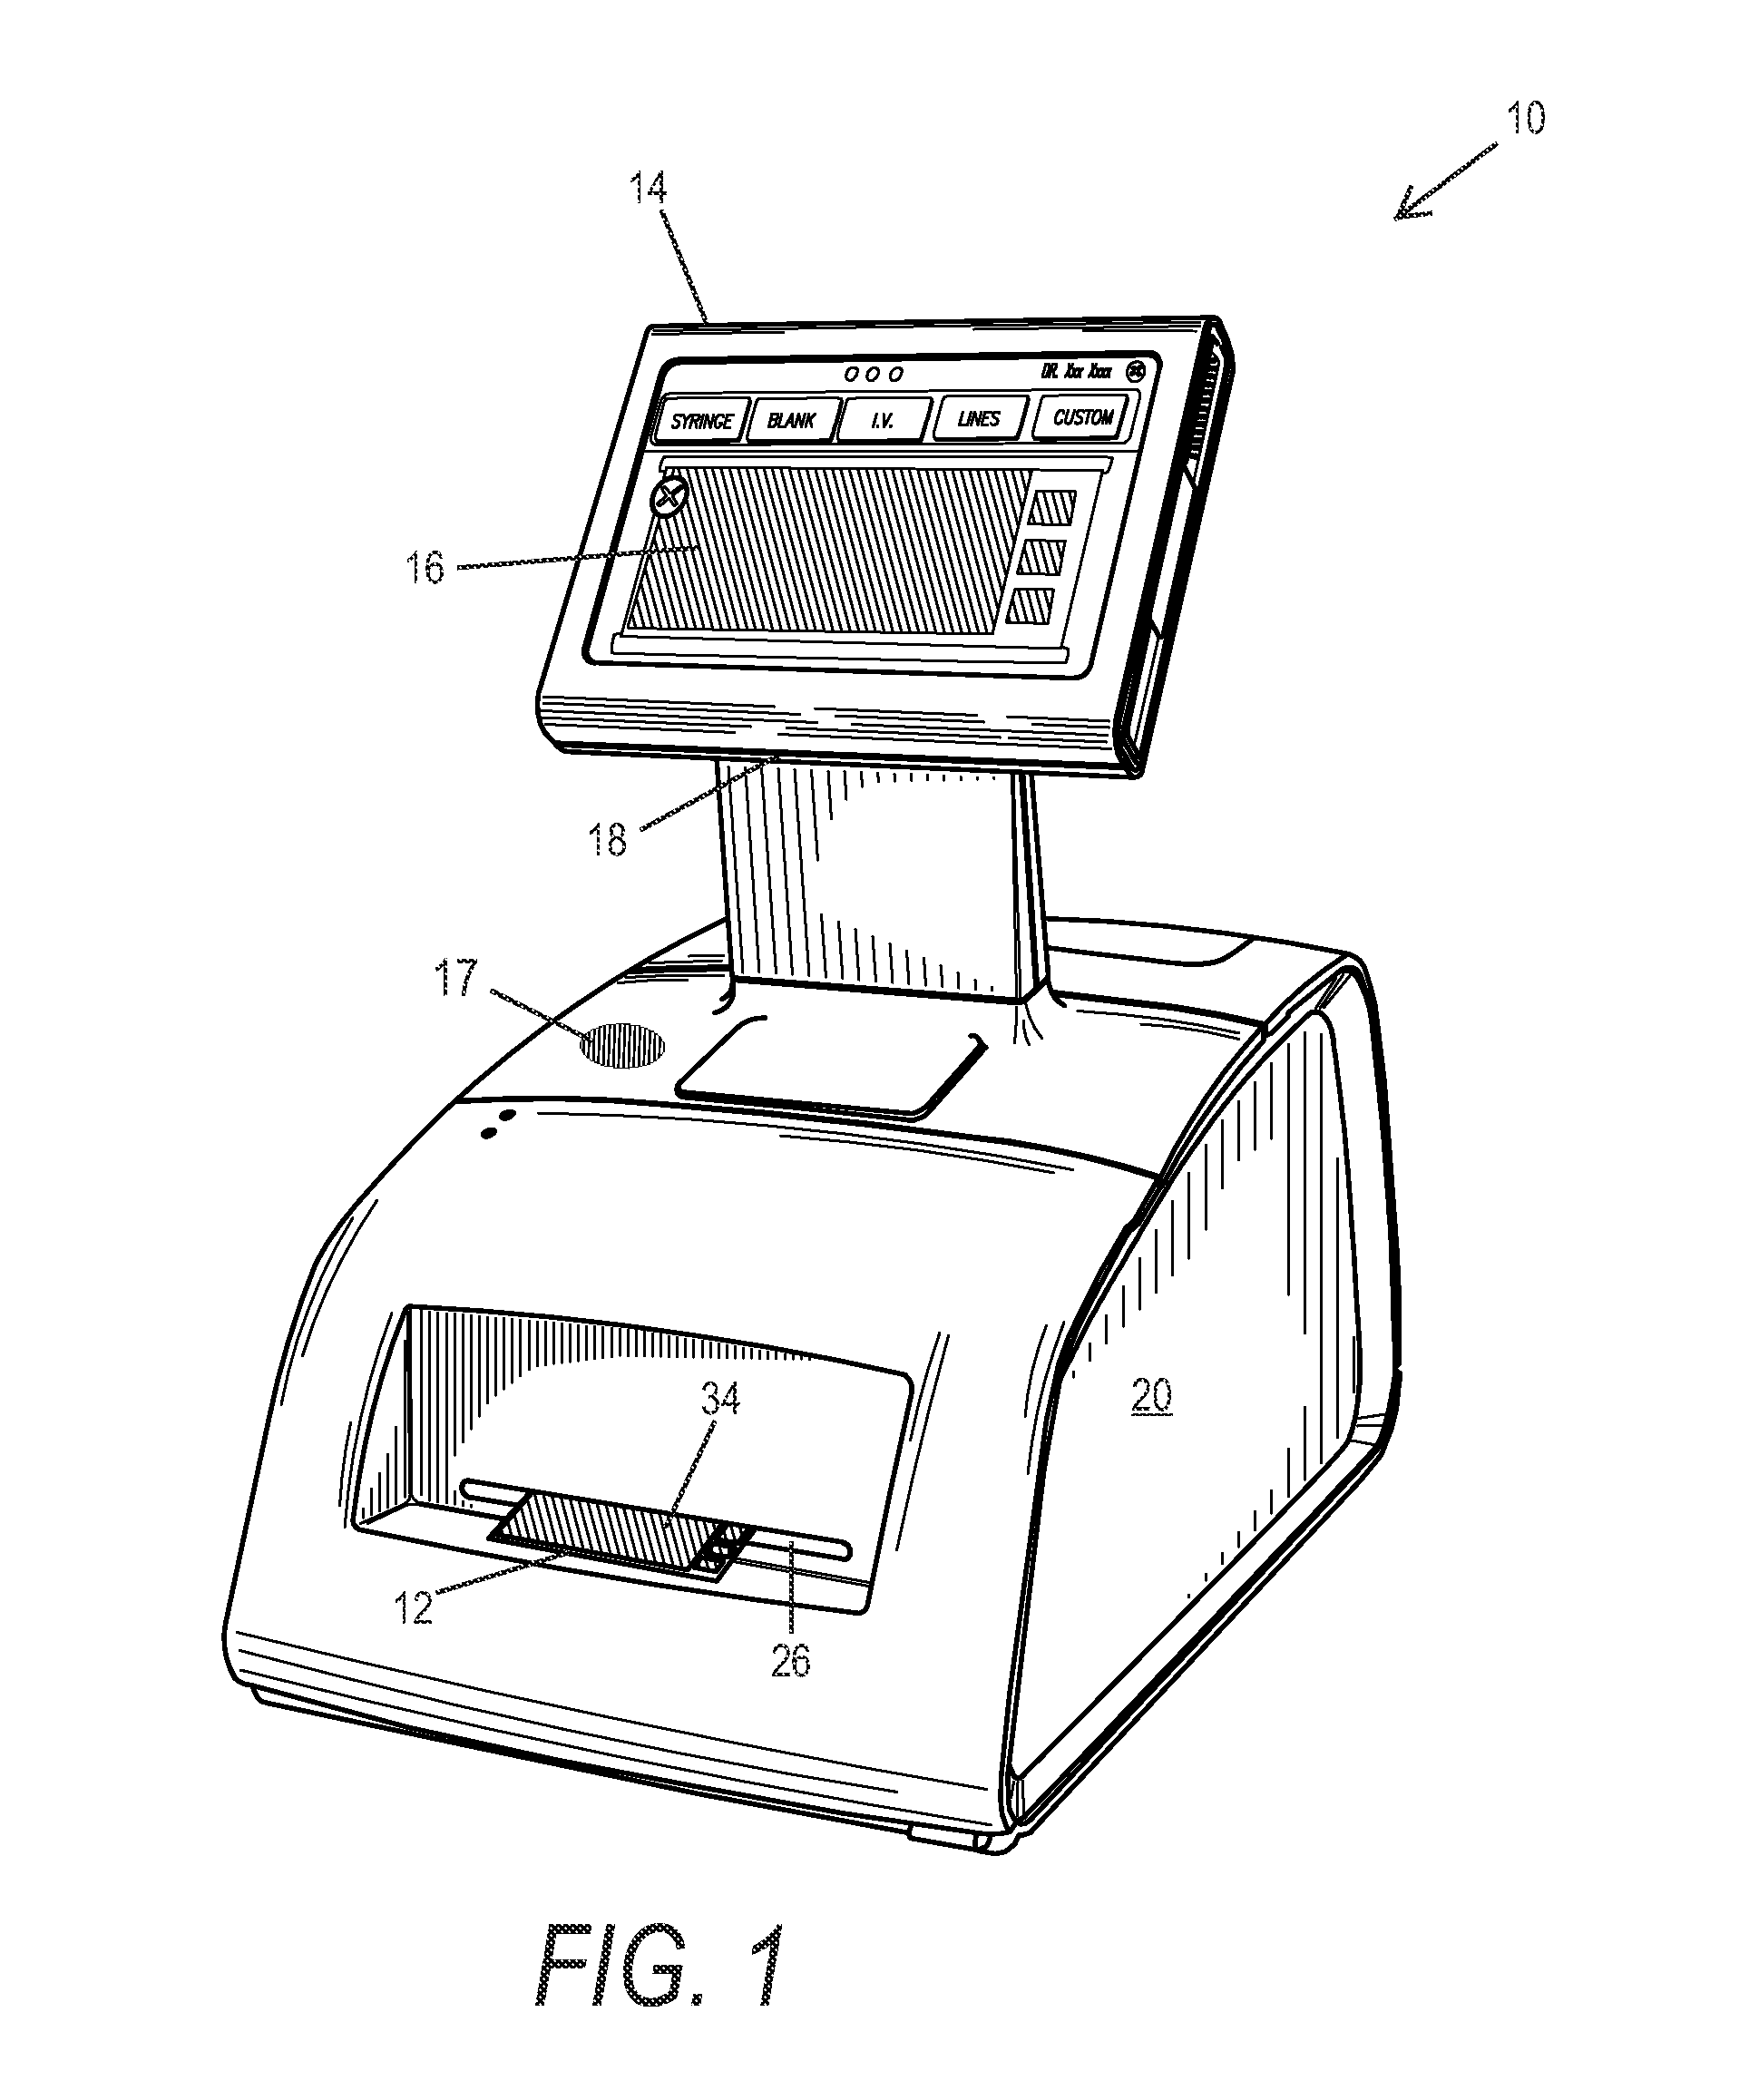 Networkable medical labeling apparatus and method